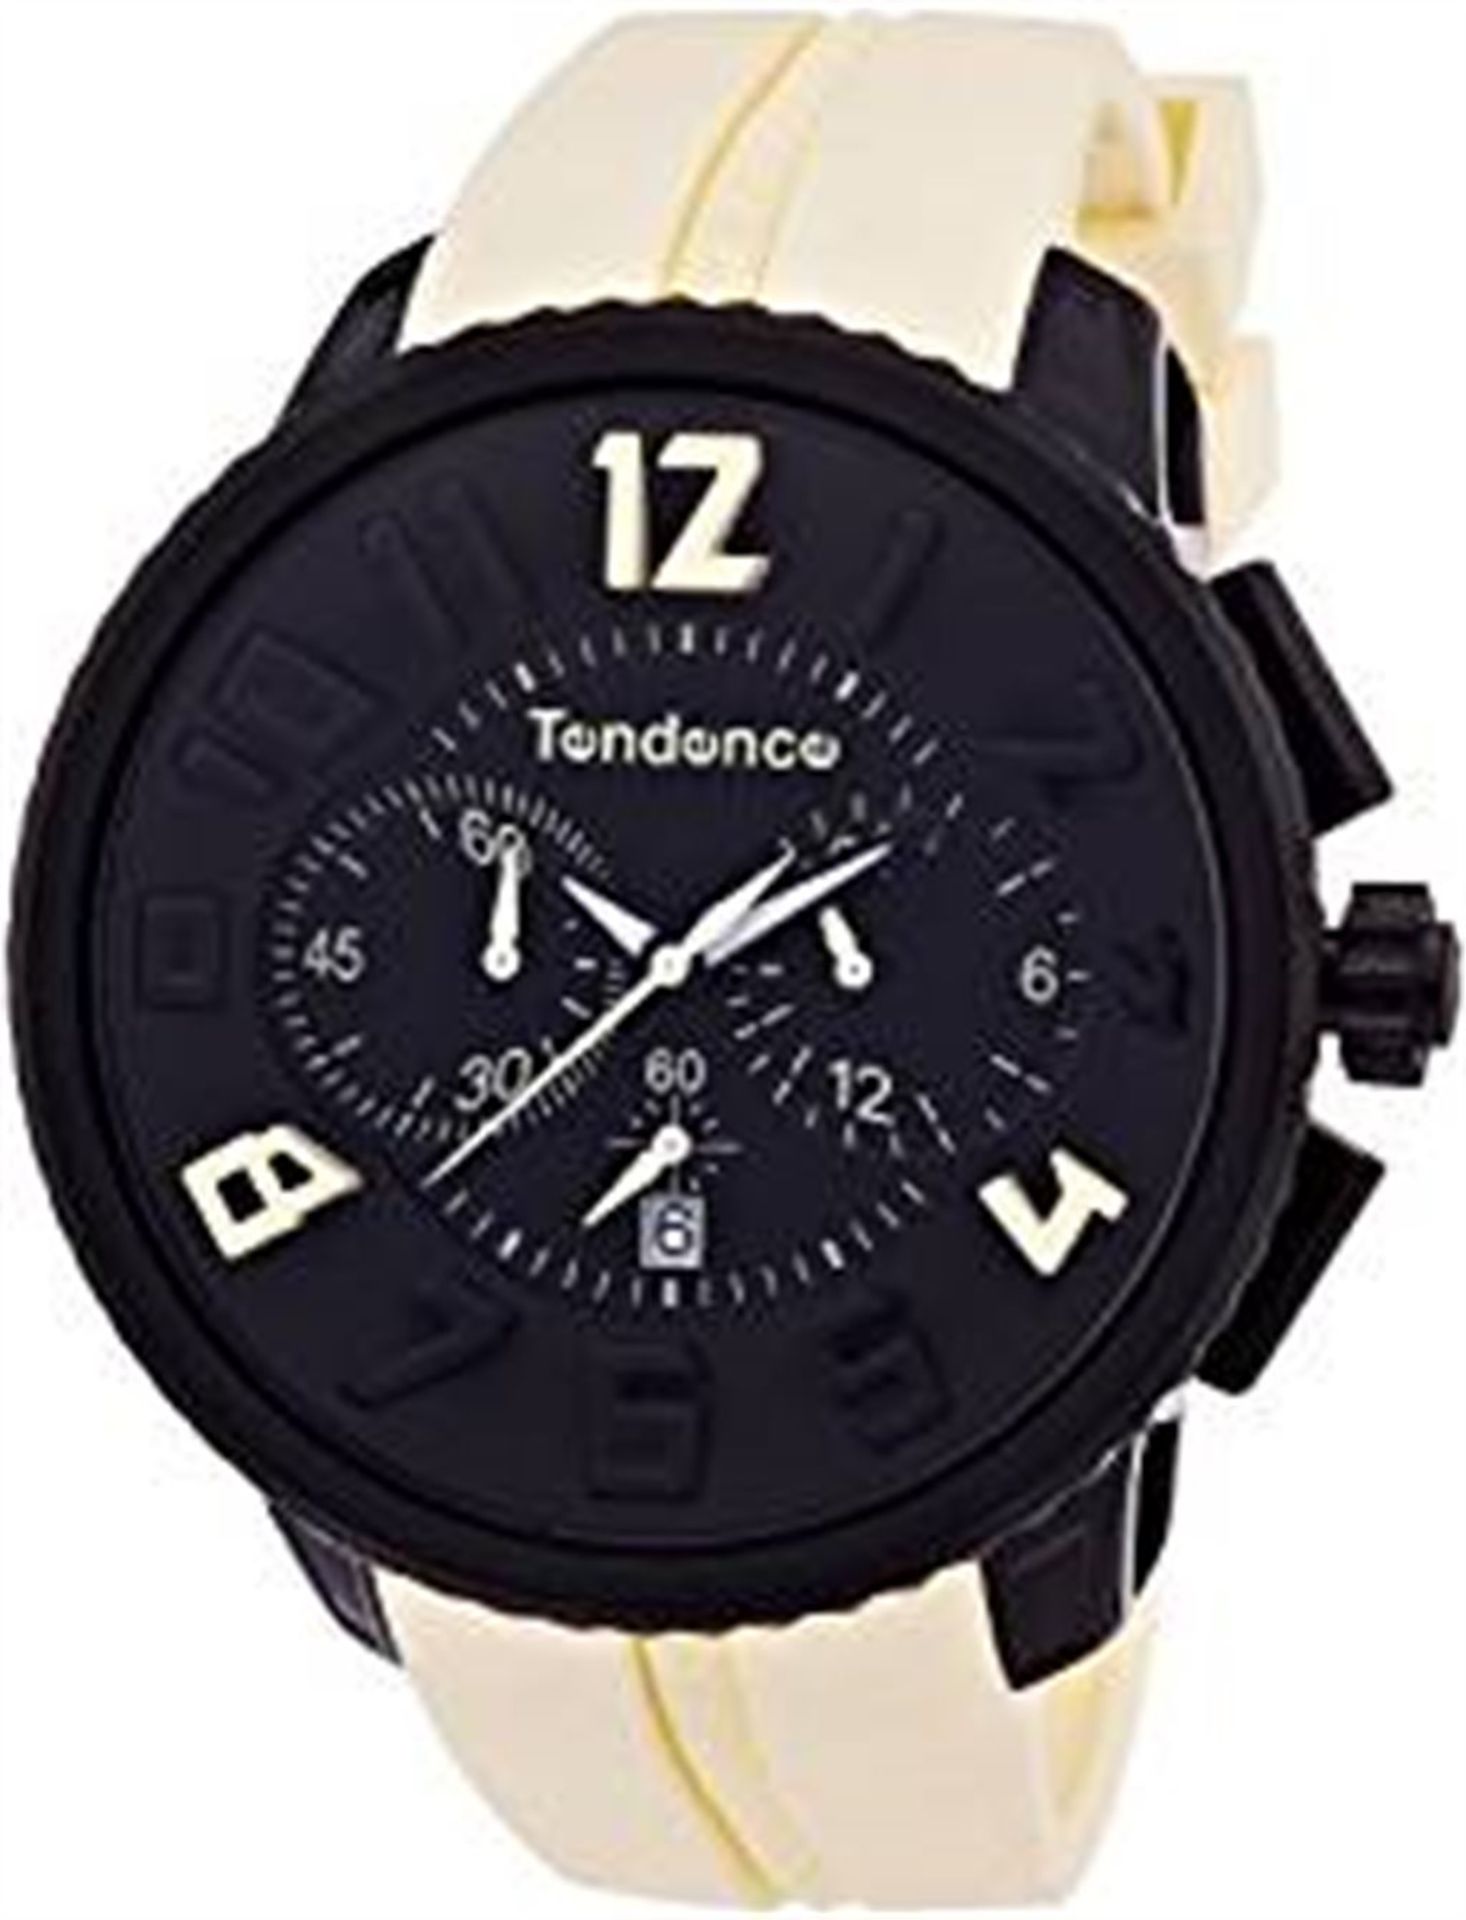 Box of 38 Discounted Watches from Avalanche and more! Great Resell Potential! Details Inside - Image 25 of 44